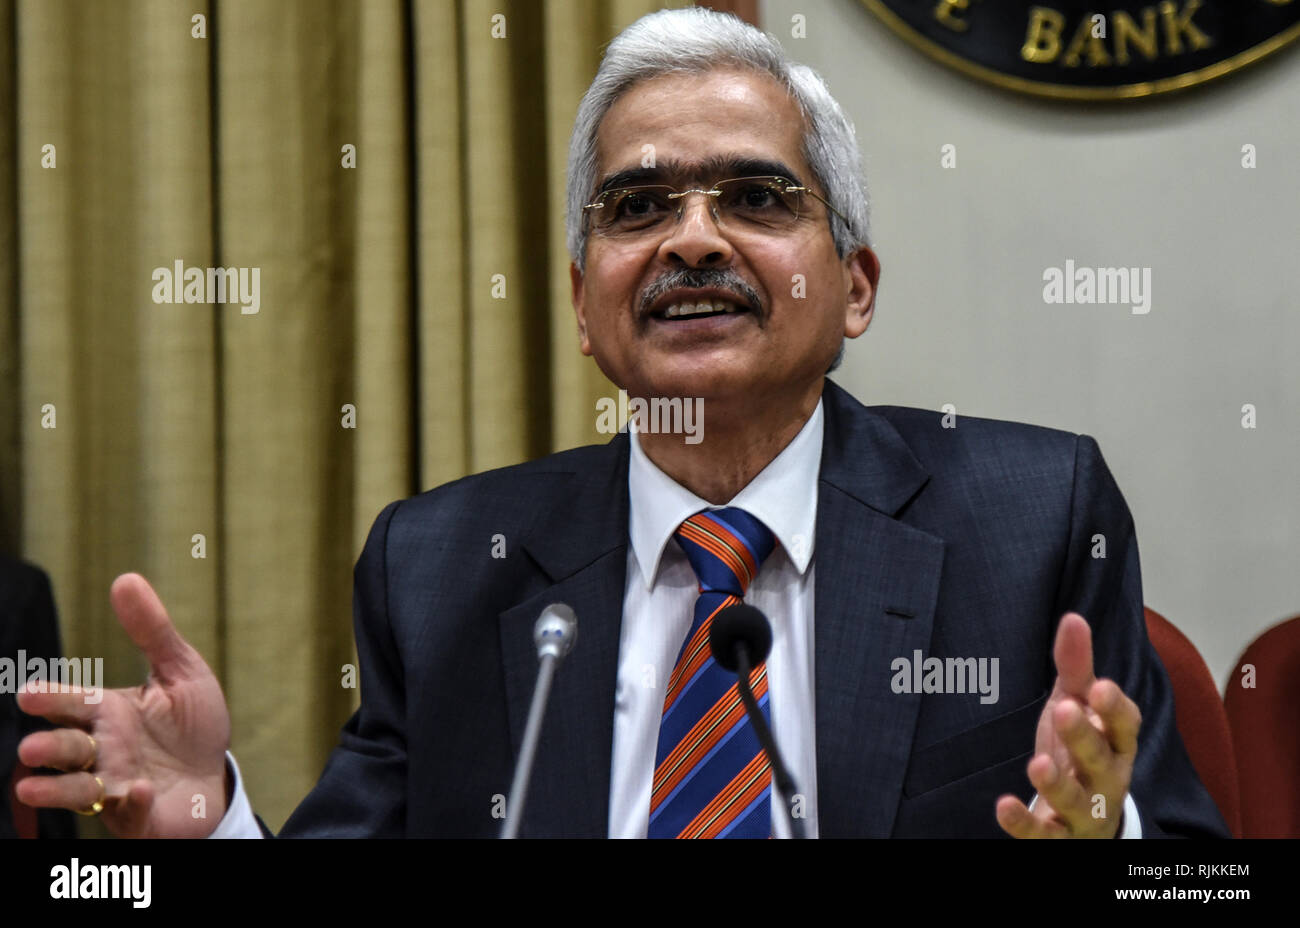 (190207) -- MUMBAI, Feb. 7, 2019 (Xinhua) -- The Reserve Bank of India (RBI) Governor Shaktikanta Das attends a news conference after a monetary policy review in Mumbai, India, Feb. 7, 2019. India's central bank - the Reserve Bank of India (RBI) on Thursday reduced the repo rate, or the interest rate at which it lends money to banks, by a marginal 25 basis points.     The new repo rate now stands at 6.25 percent from the earlier 6.50 percent. (Xinhua/Stringer) Stock Photo